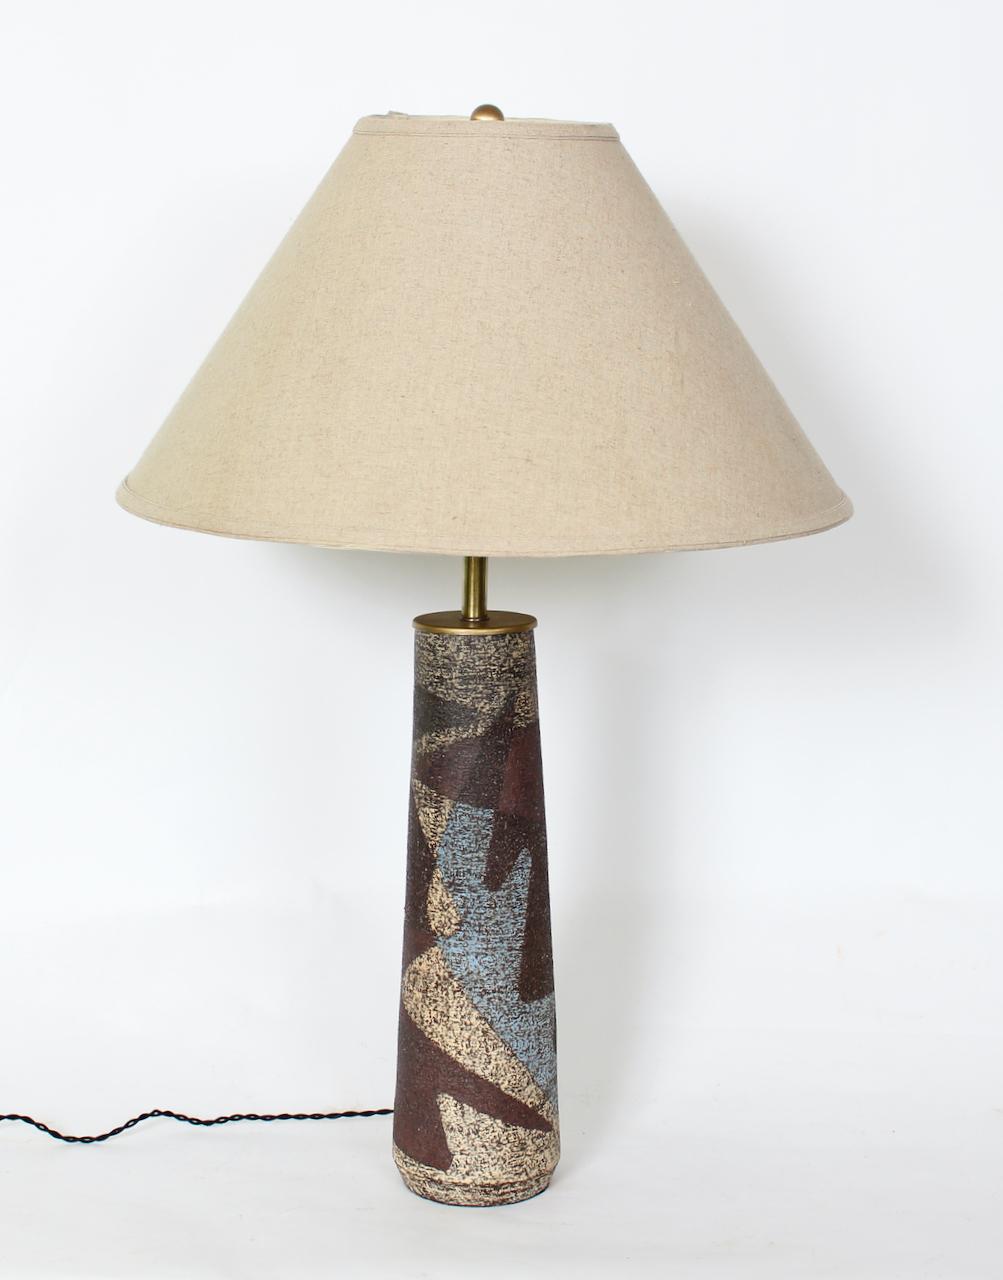 Tall Zaalberg Pottery Blue & Brown Palette Glazed Pottery Table Lamp, 1950's For Sale 11